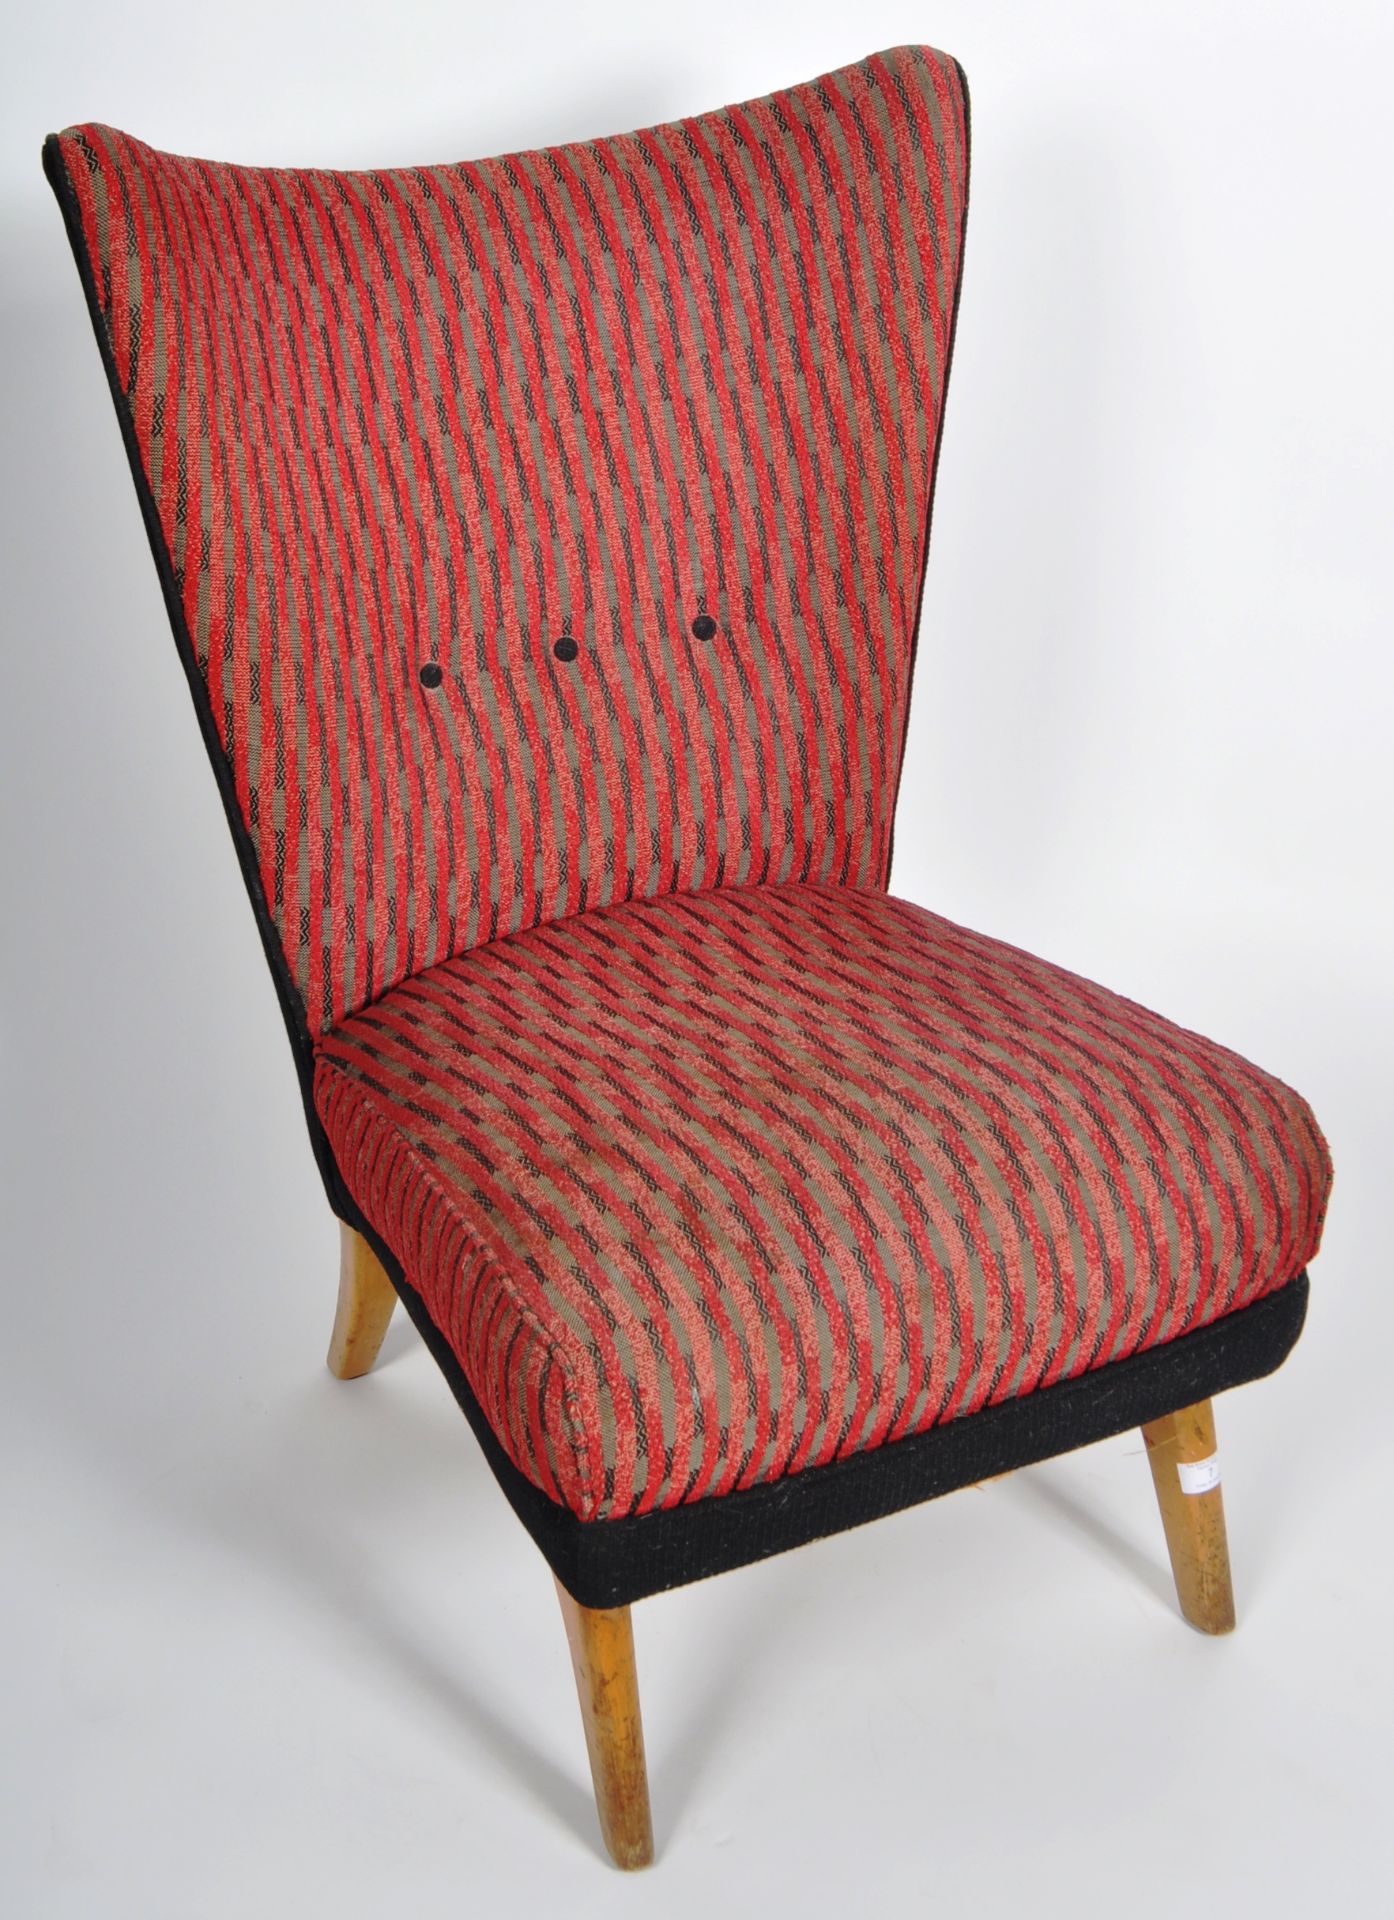 HOWARD KEITH - ENCORE CHAIR - MID CENTURY LOUNGE CHAIR - Image 2 of 9